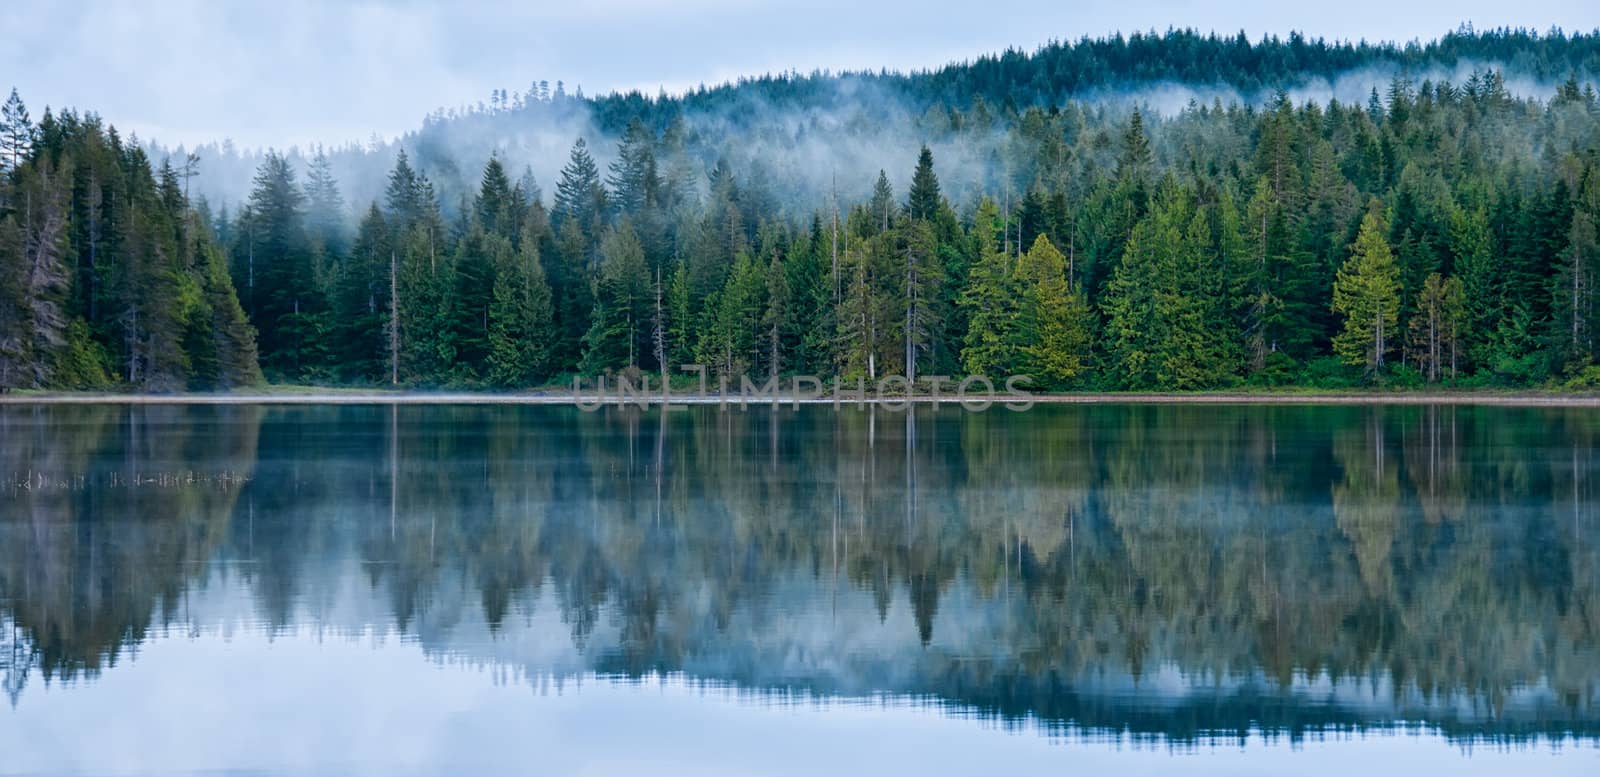 Perfect Reflection of Misty Forest in Lake by JamesWheeler